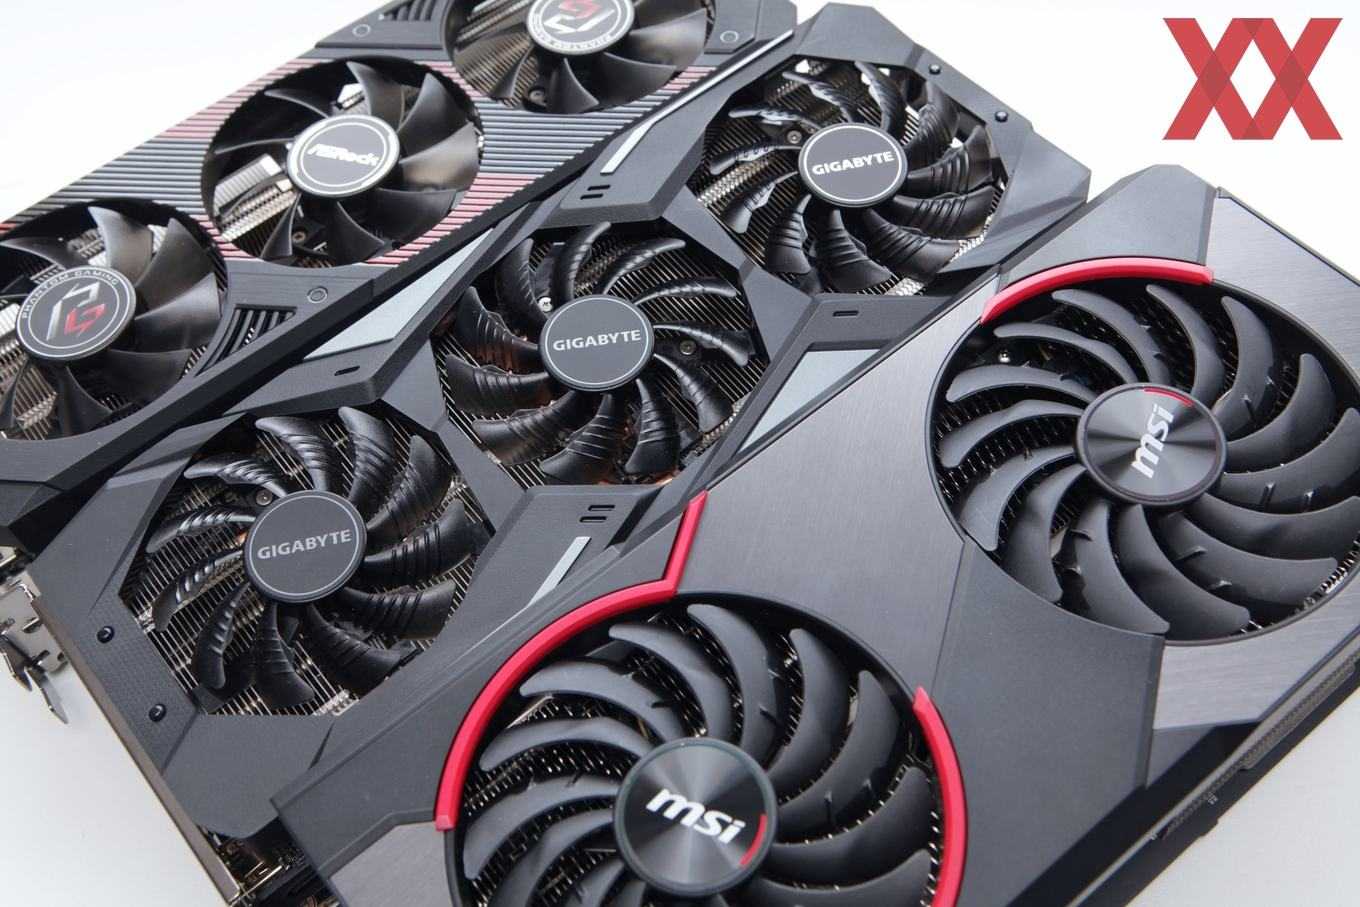 Gigabyte radeon rx 470 g1 gaming 4g review | pcmag